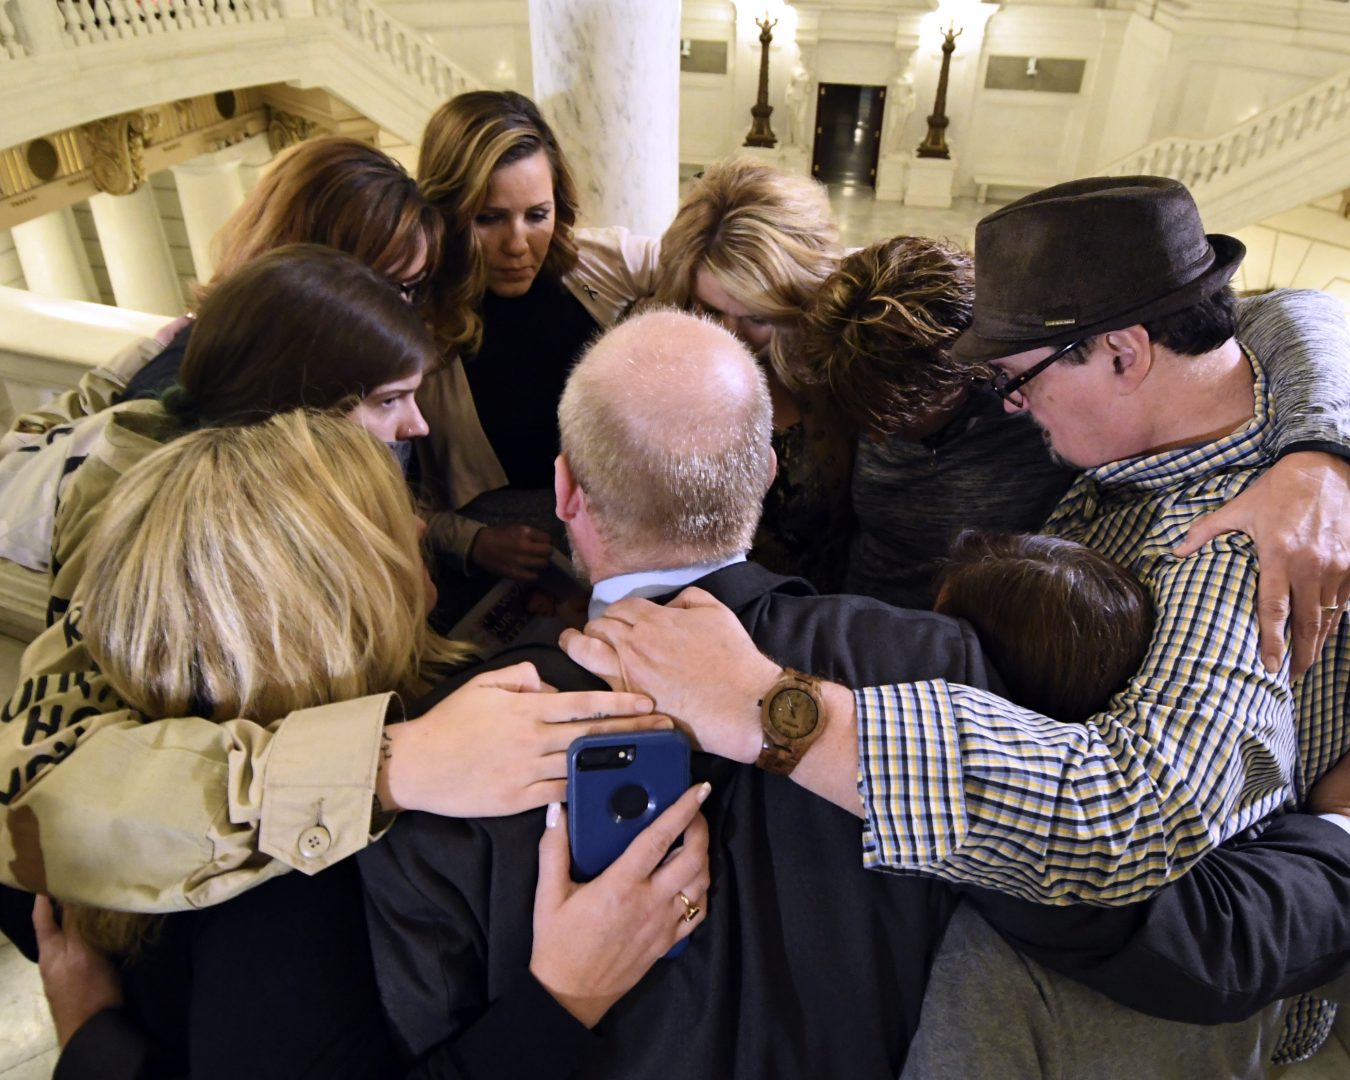 Survivors of child sexual abuse hug in the Pennsylvania Capitol while awaiting legislation to respond to a landmark state grand jury report on child sexual abuse in the Roman Catholic Church, Wednesday, Oct. 17, 2018 in Harrisburg, Pa.